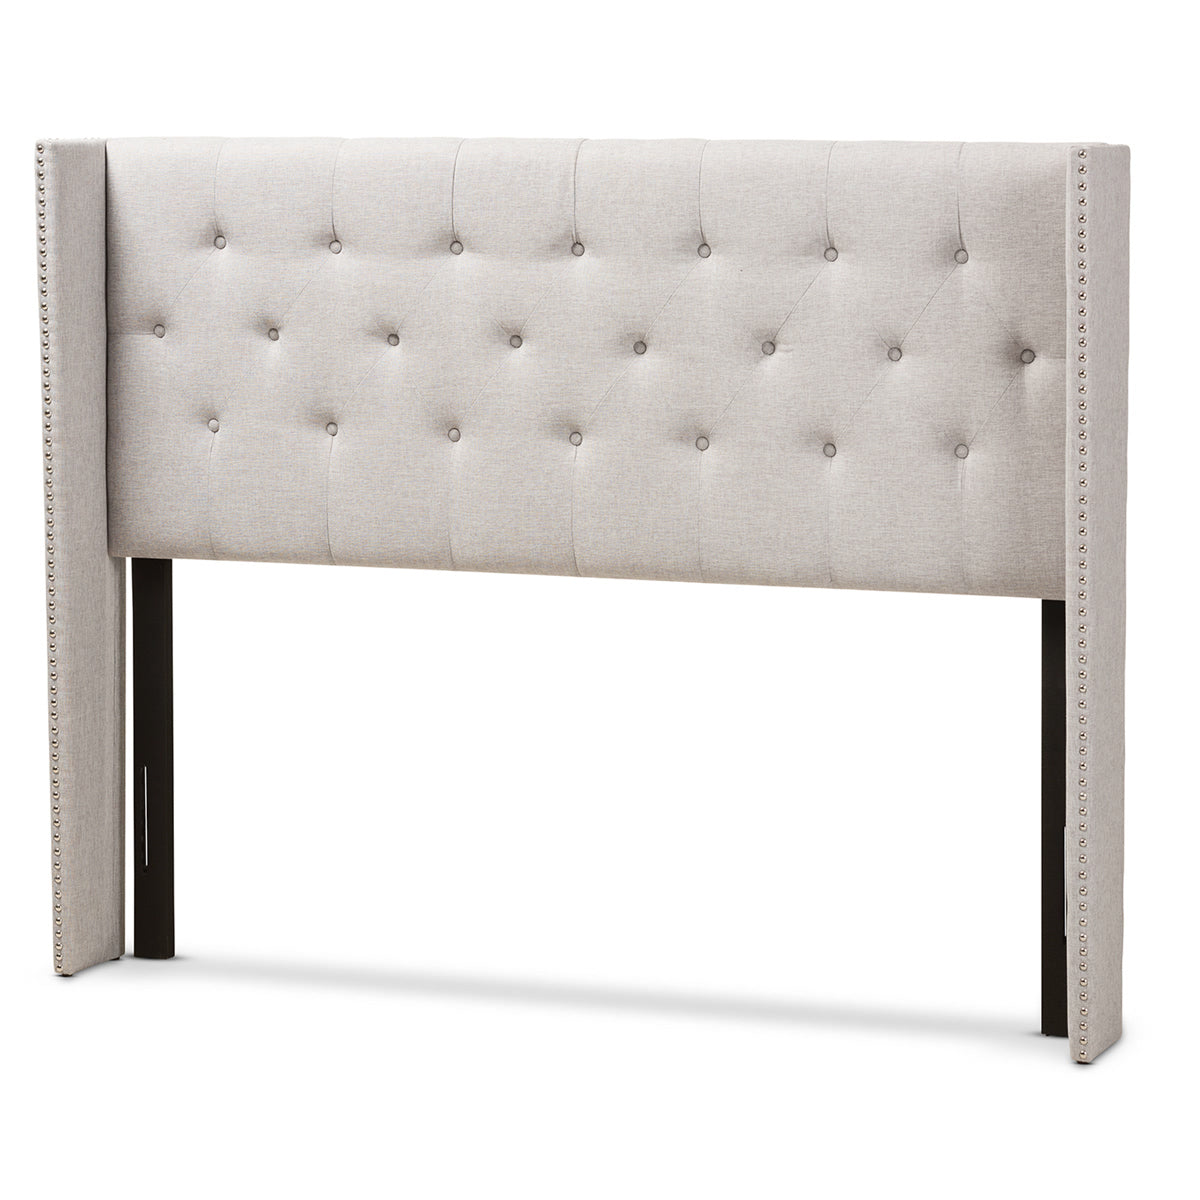 Baxton Studio Ally Modern And Contemporary Greyish Beige Fabric Button-Tufted Nail head King Size Winged Headboard Baxton Studio-King Headboard-Minimal And Modern - 2